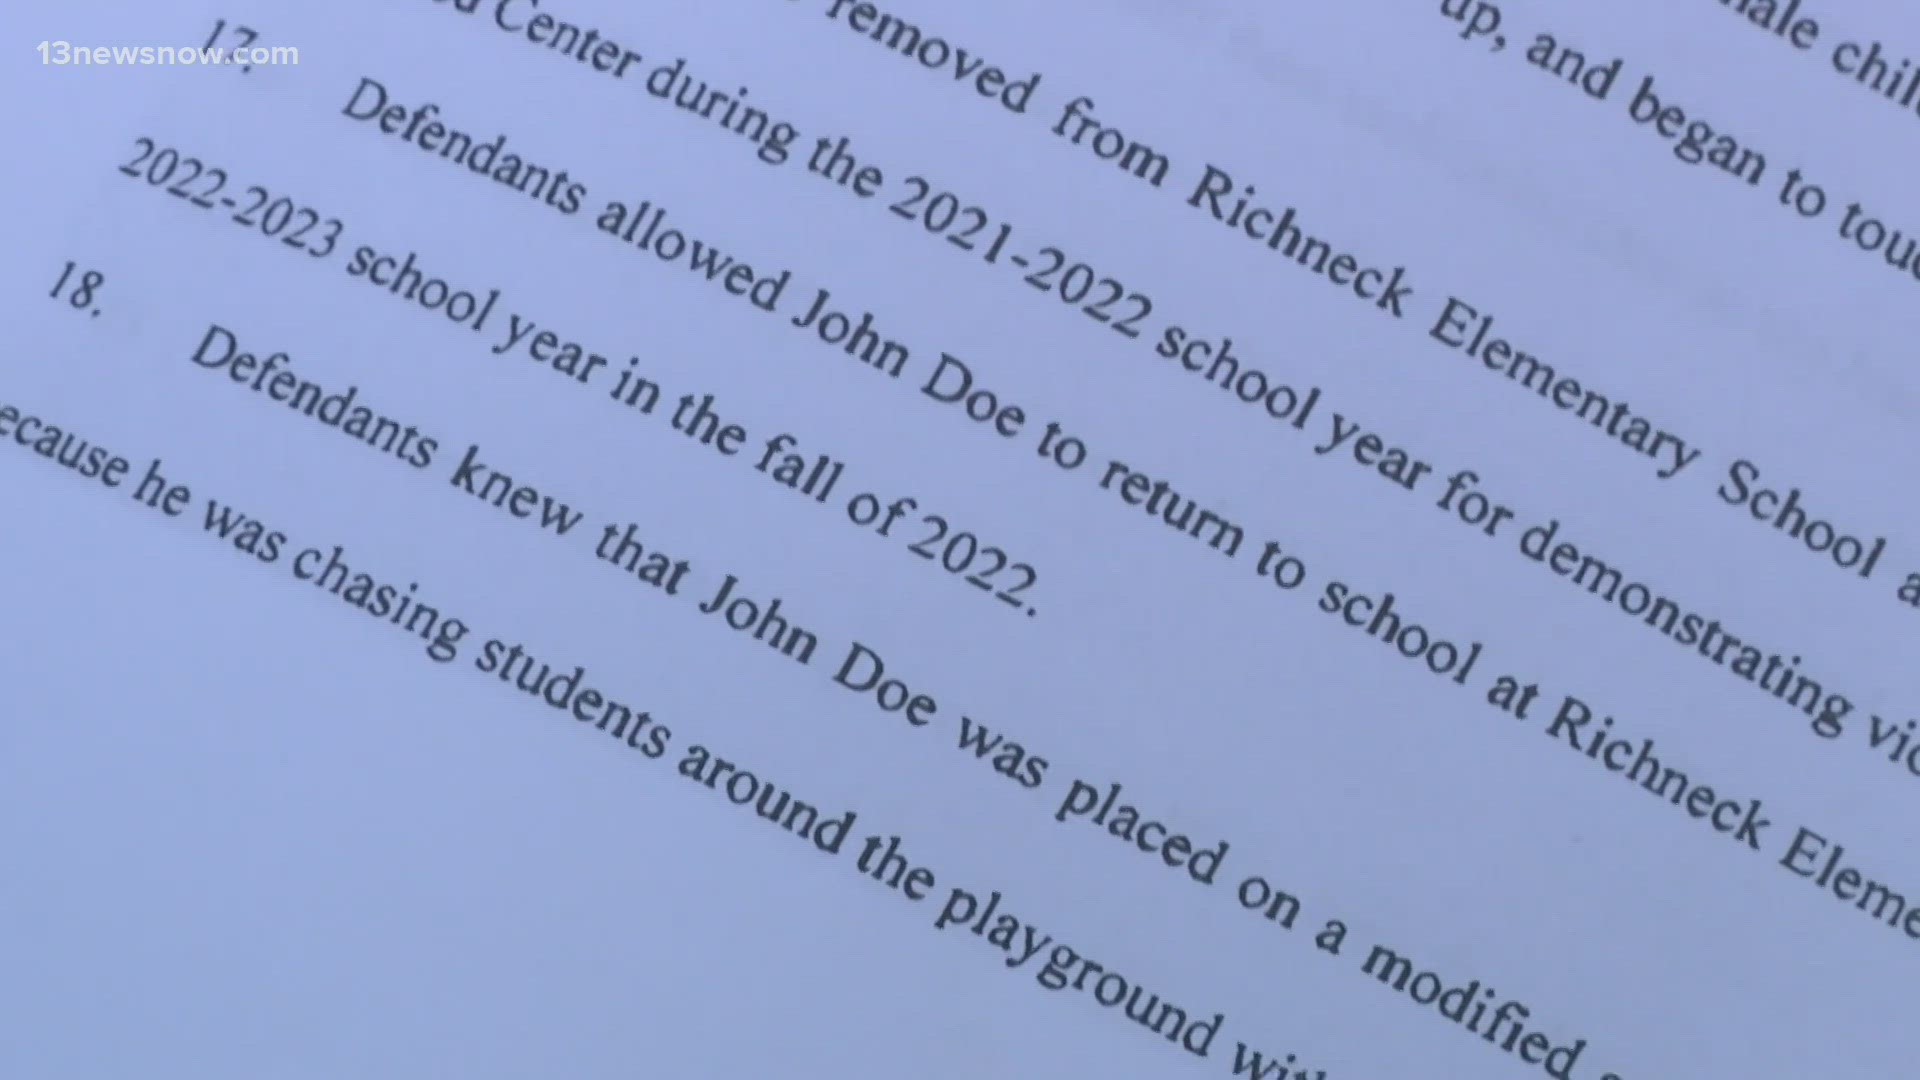 New details are revealed in documents that were filed April 3 against NNPS and several school administrators who were aware of troubling behavior.